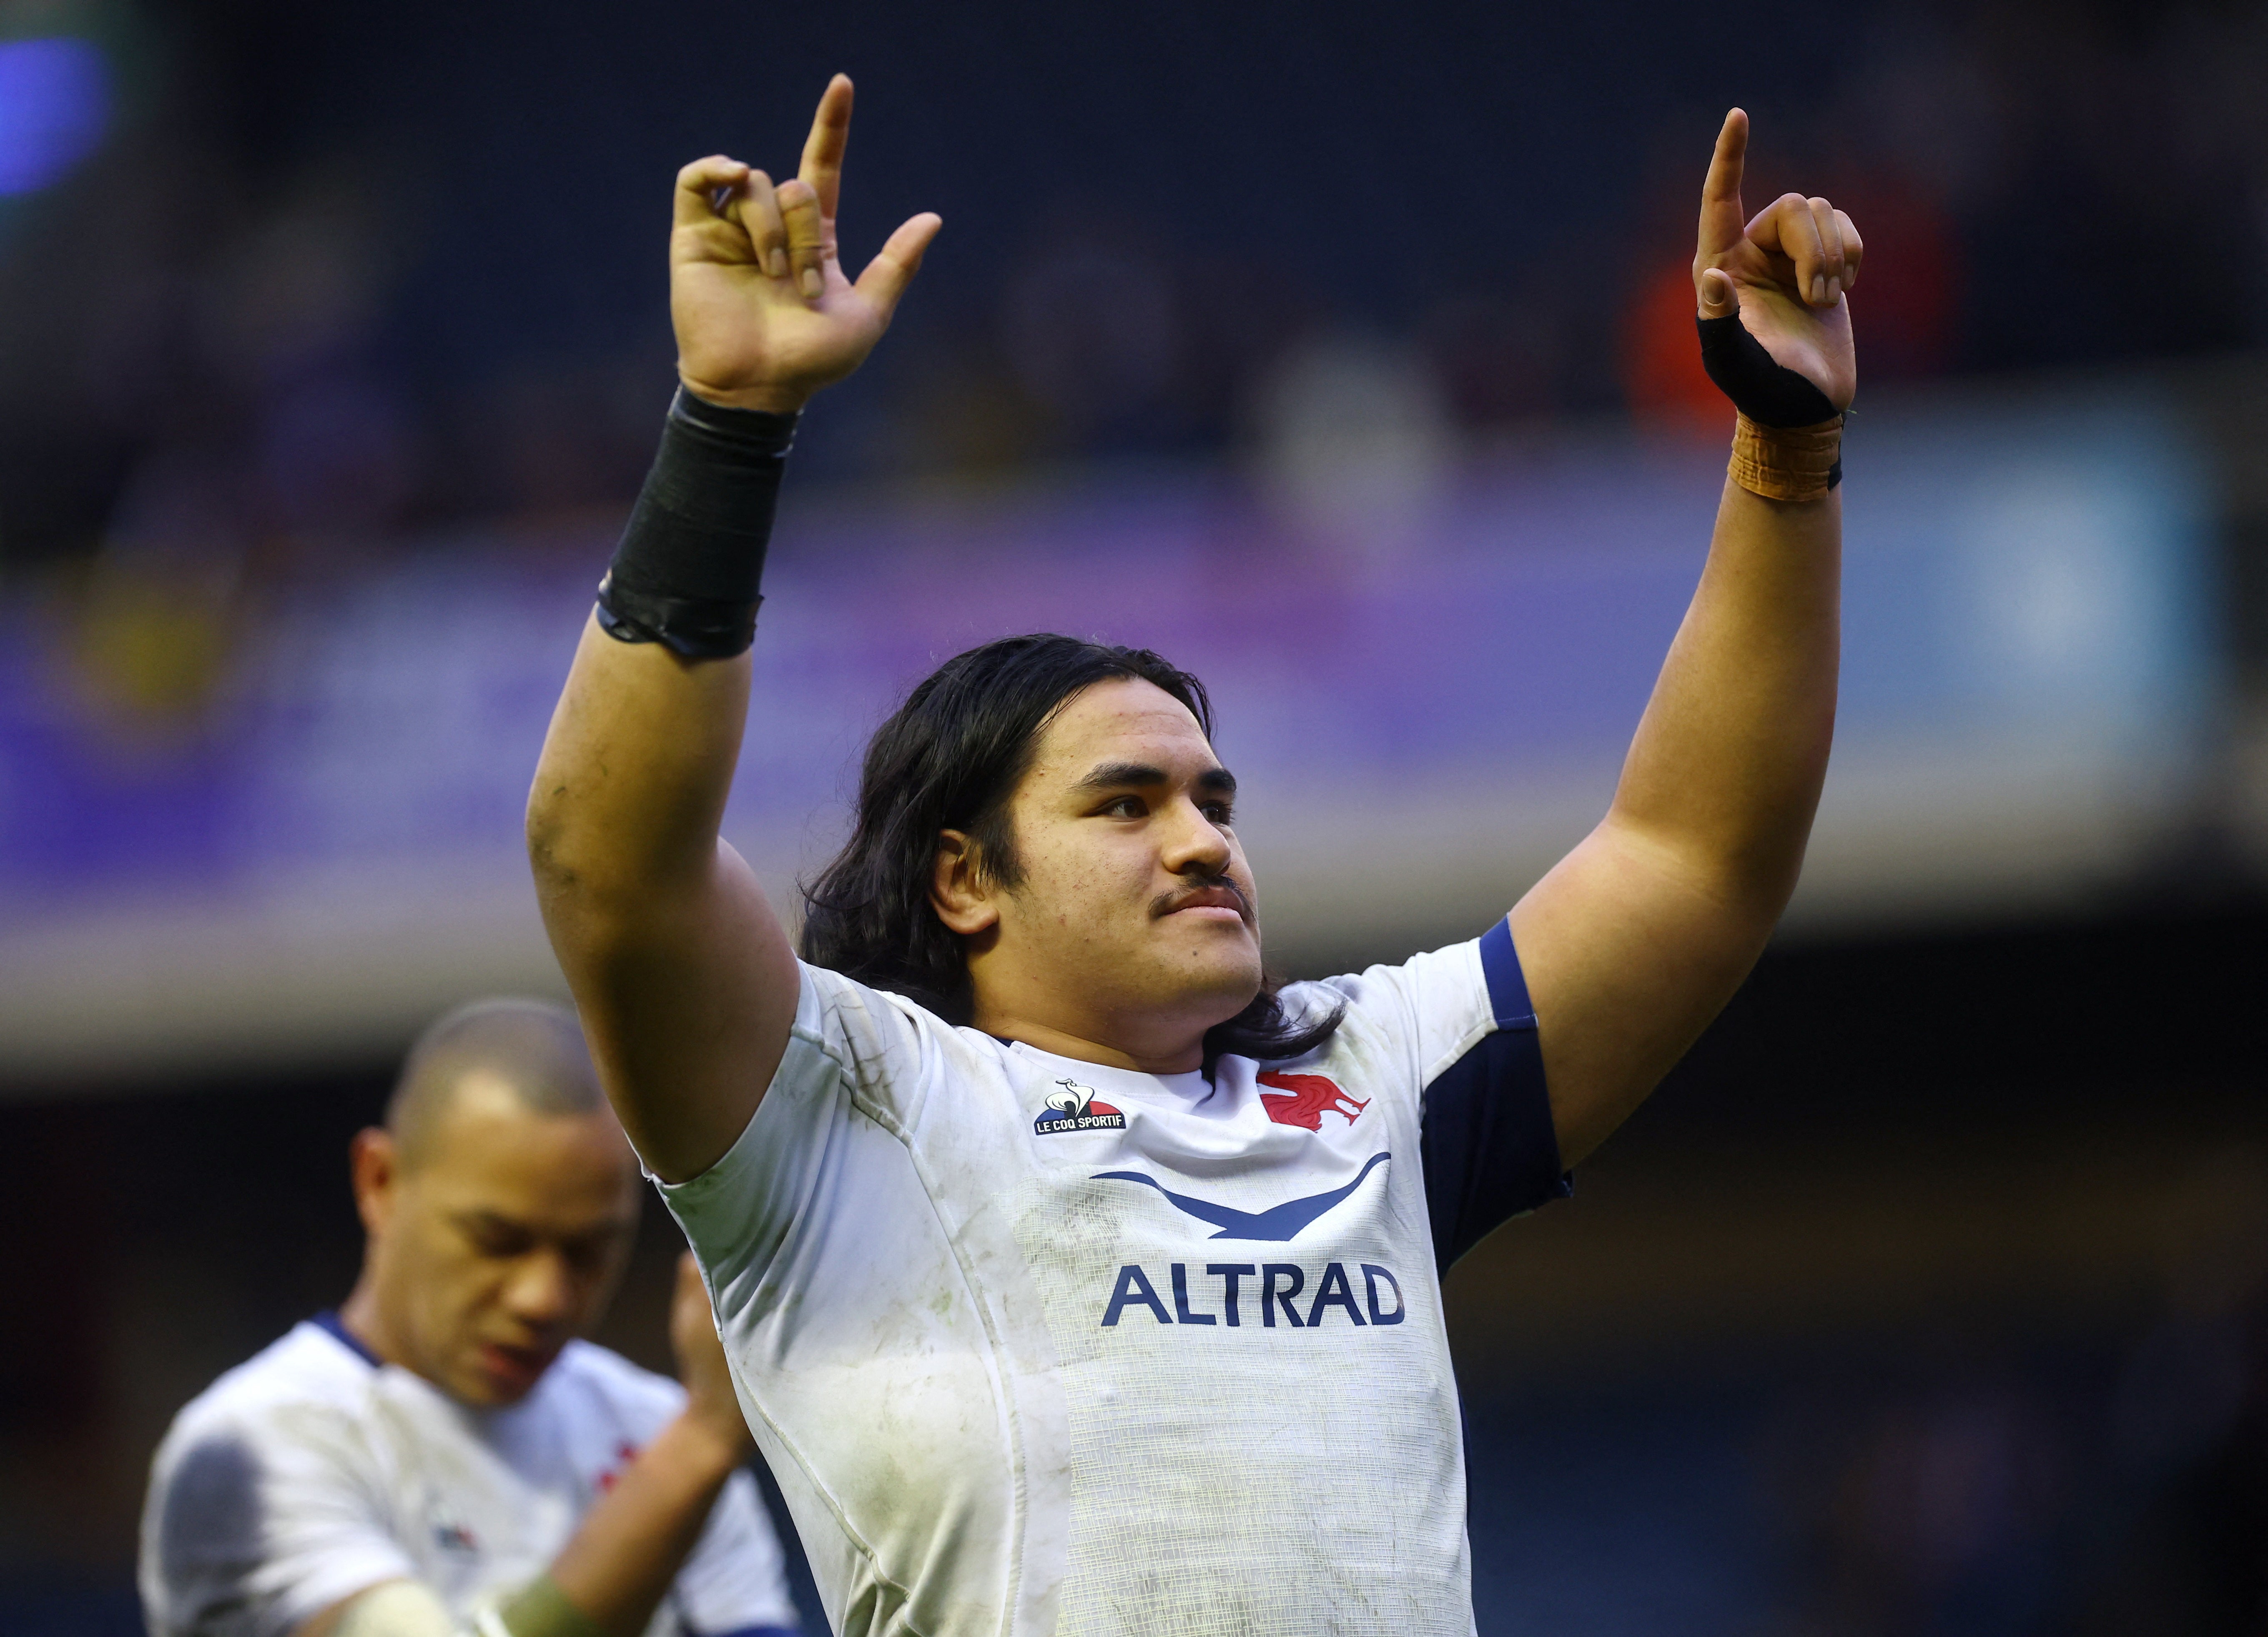 Posolo Tuilagi will make his first France start on Sunday